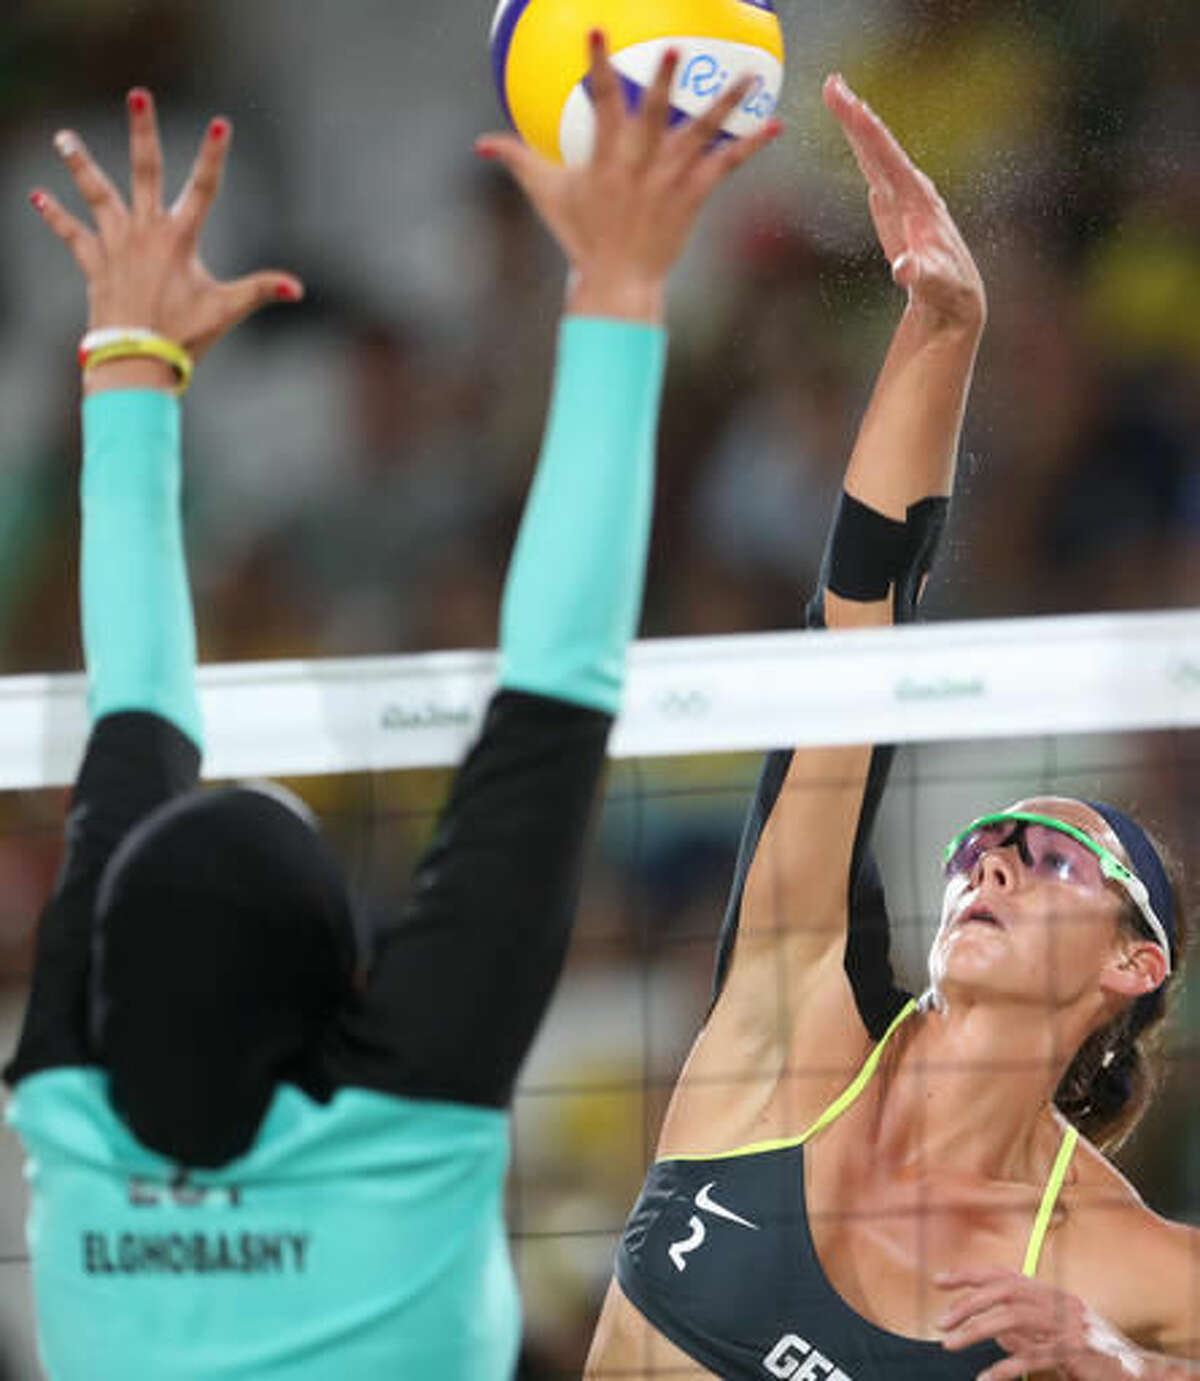 Germany's Kira Walkenhorst, right, tries to spike a ball past Egypt's Doaa Elghobashy, left, during a women's beach volleyball match at the 2016 Summer Olympics in Rio de Janeiro, Brazil, Sunday, Aug. 7, 2016. (AP Photo/Petr David Josek)